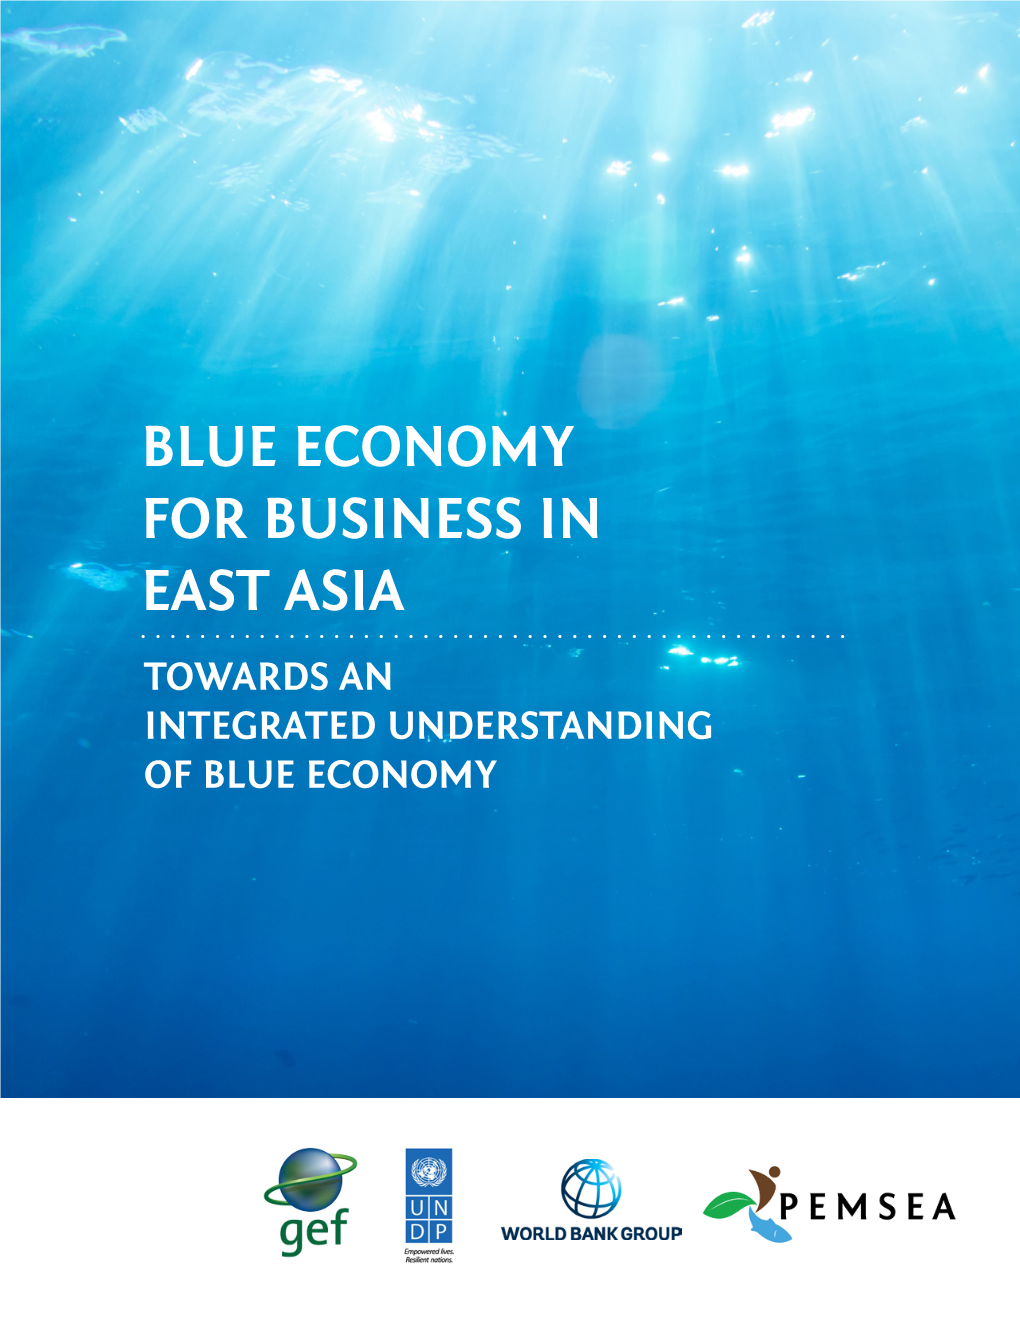 Blue Economy for Business in East Asia